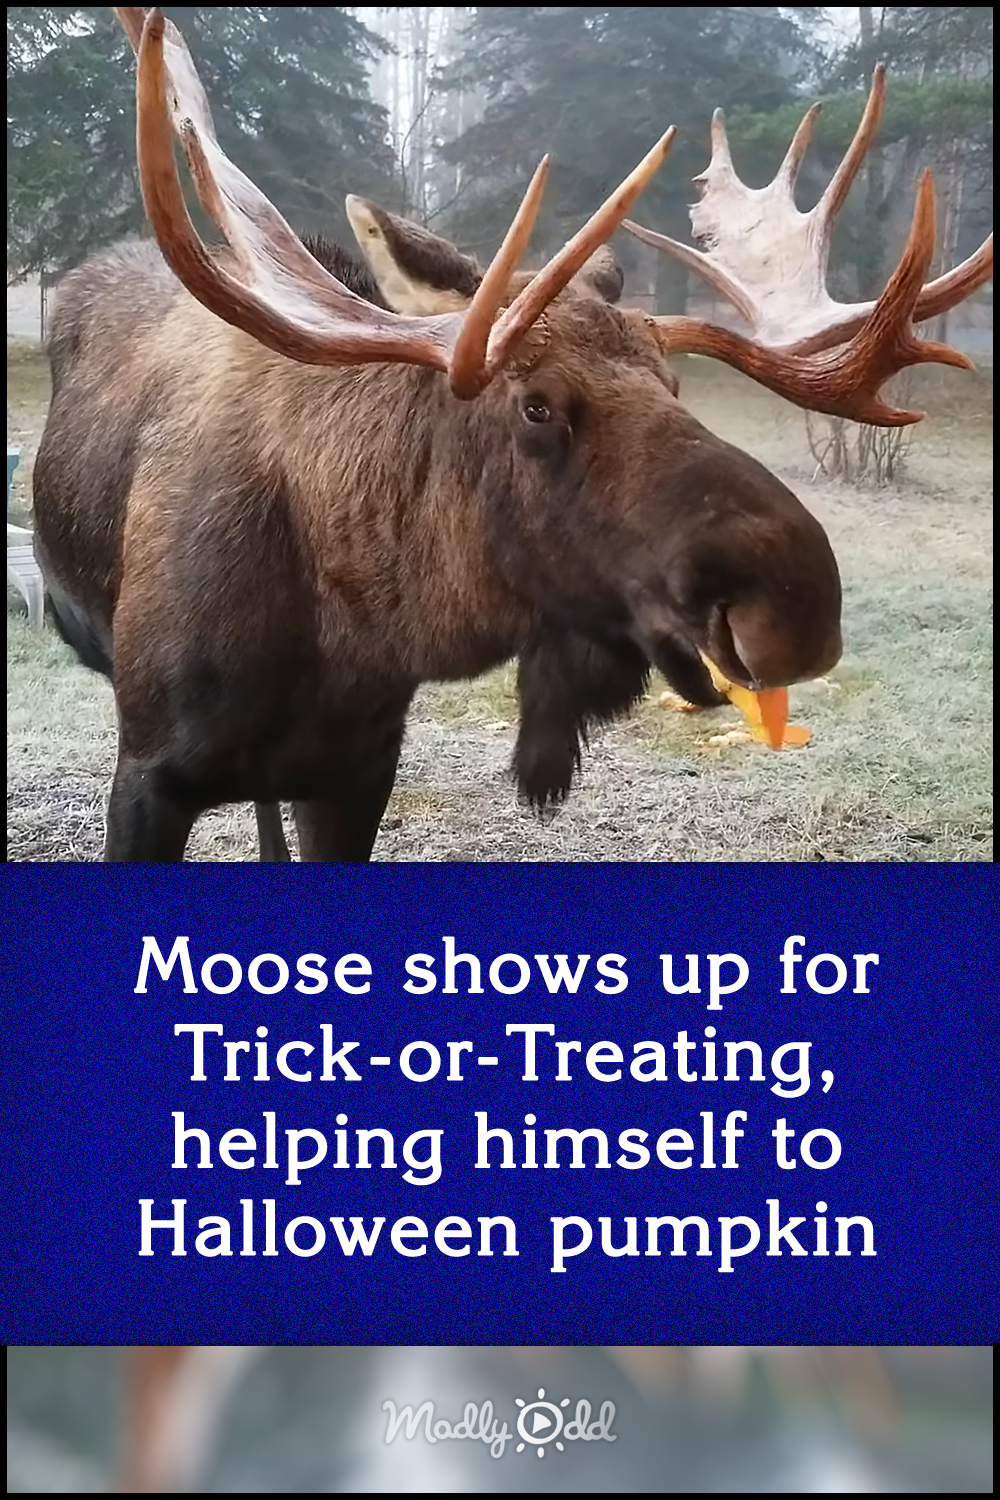 Moose shows up for Trick-or-Treating, helping himself to Halloween pumpkin